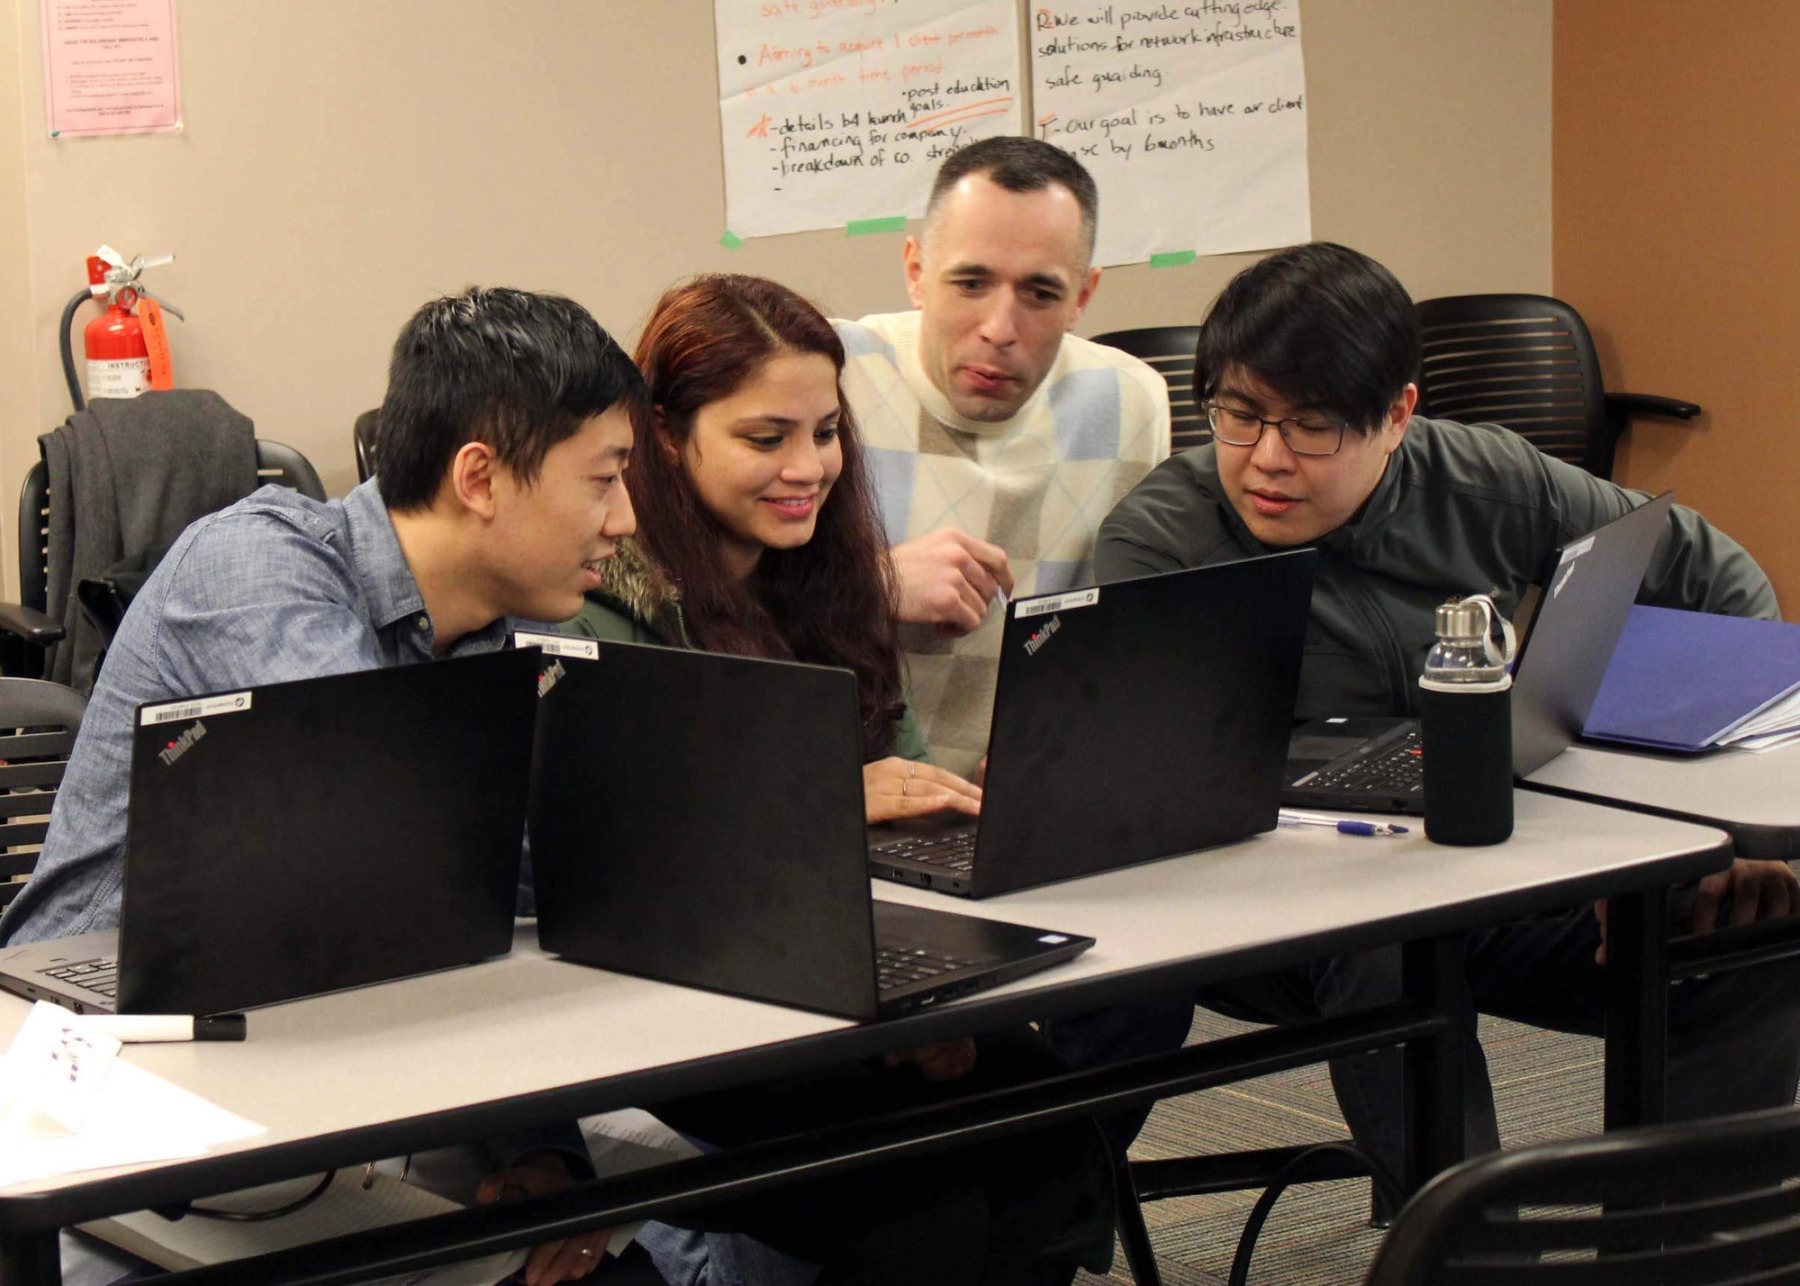 Four people in a classroom surround a black laptop for a group project.